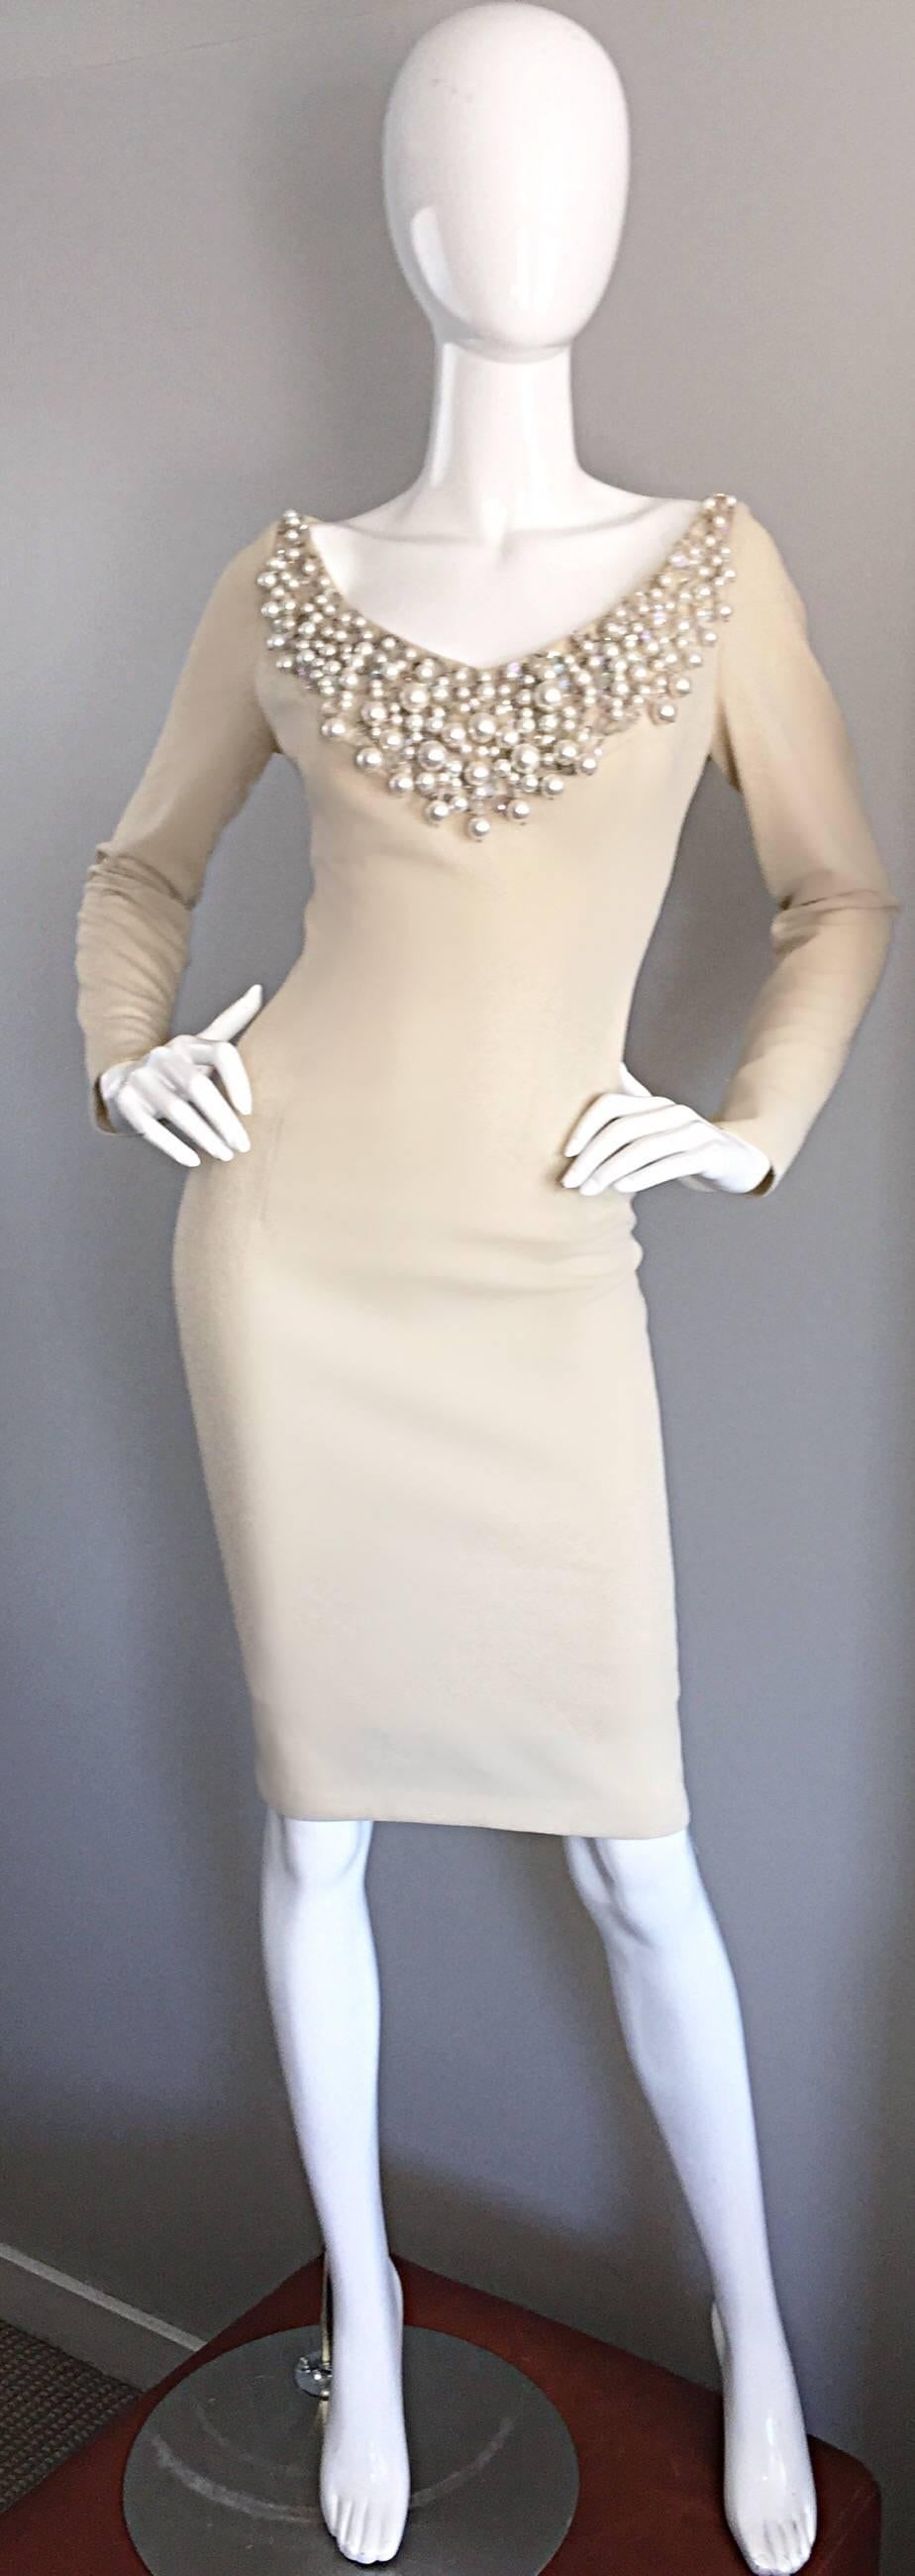 Exceptional vintage 60s SYDNEY NORTH beige crepe jersey wiggle dress! Features hand sewn oversized pearls, sequins and beads at the front bust, acting as a chic collar. Flattering body hugging fit looks fantastic on an array of shapes. Sleek long